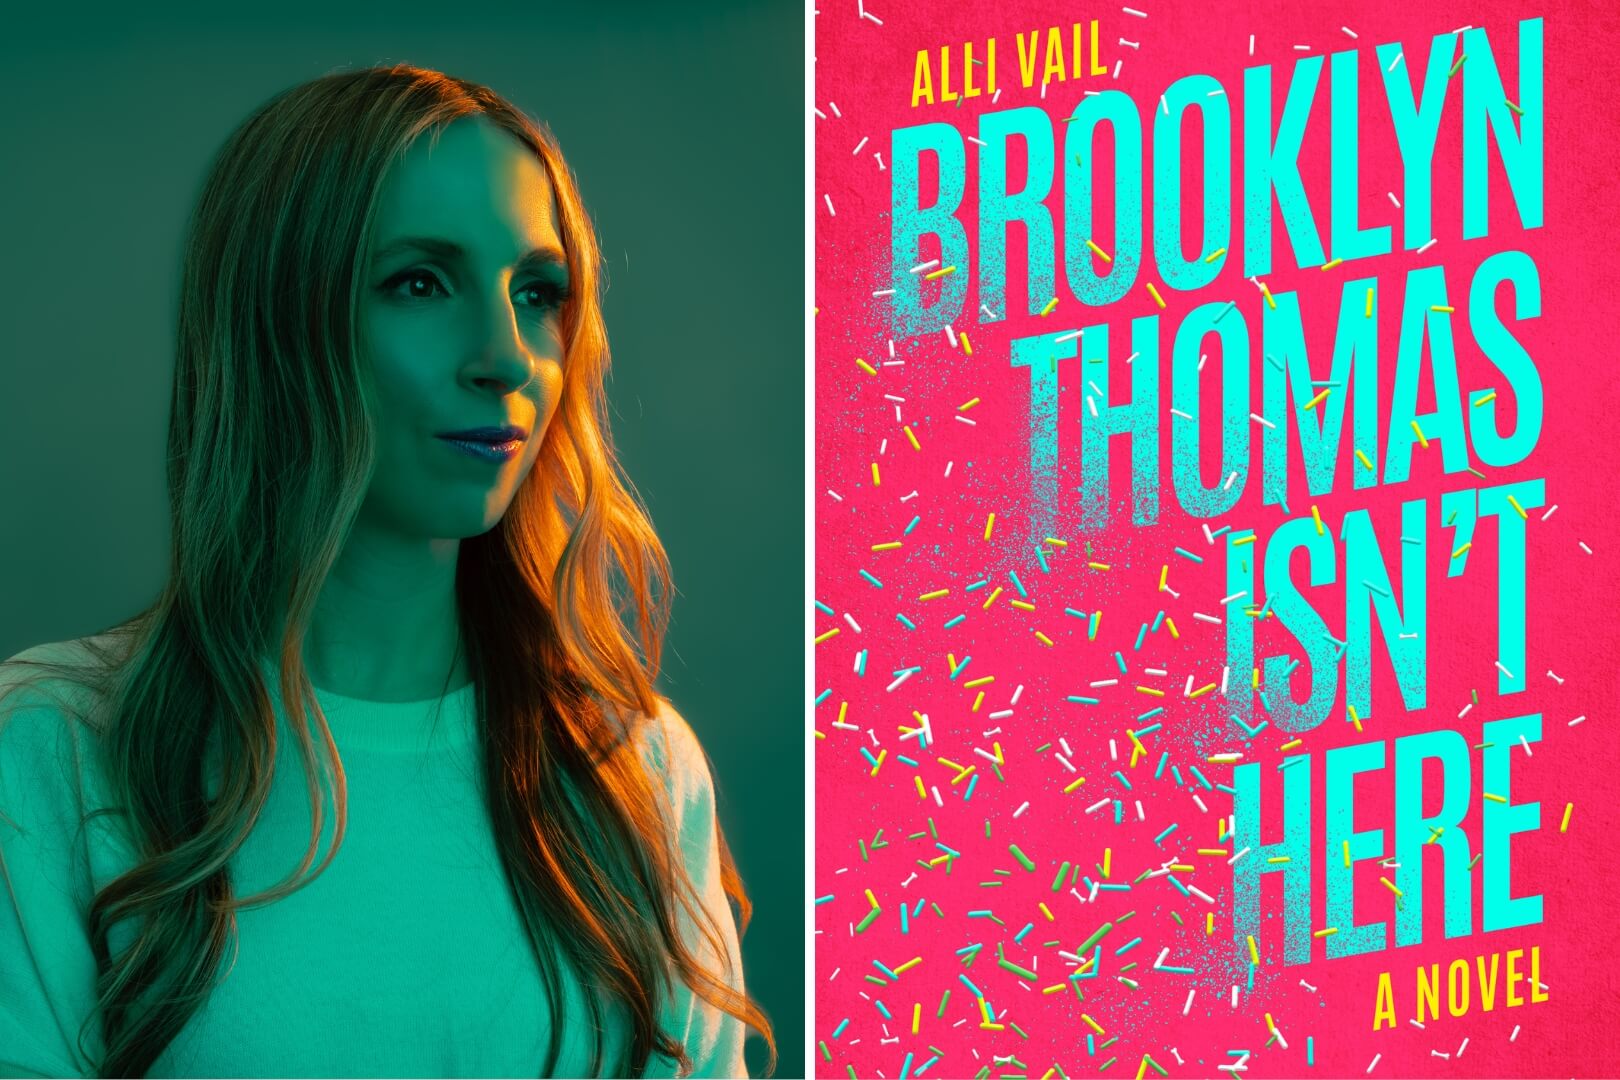 Q&A with Alli Vail, Author of Brooklyn Thomas Isn’t Here